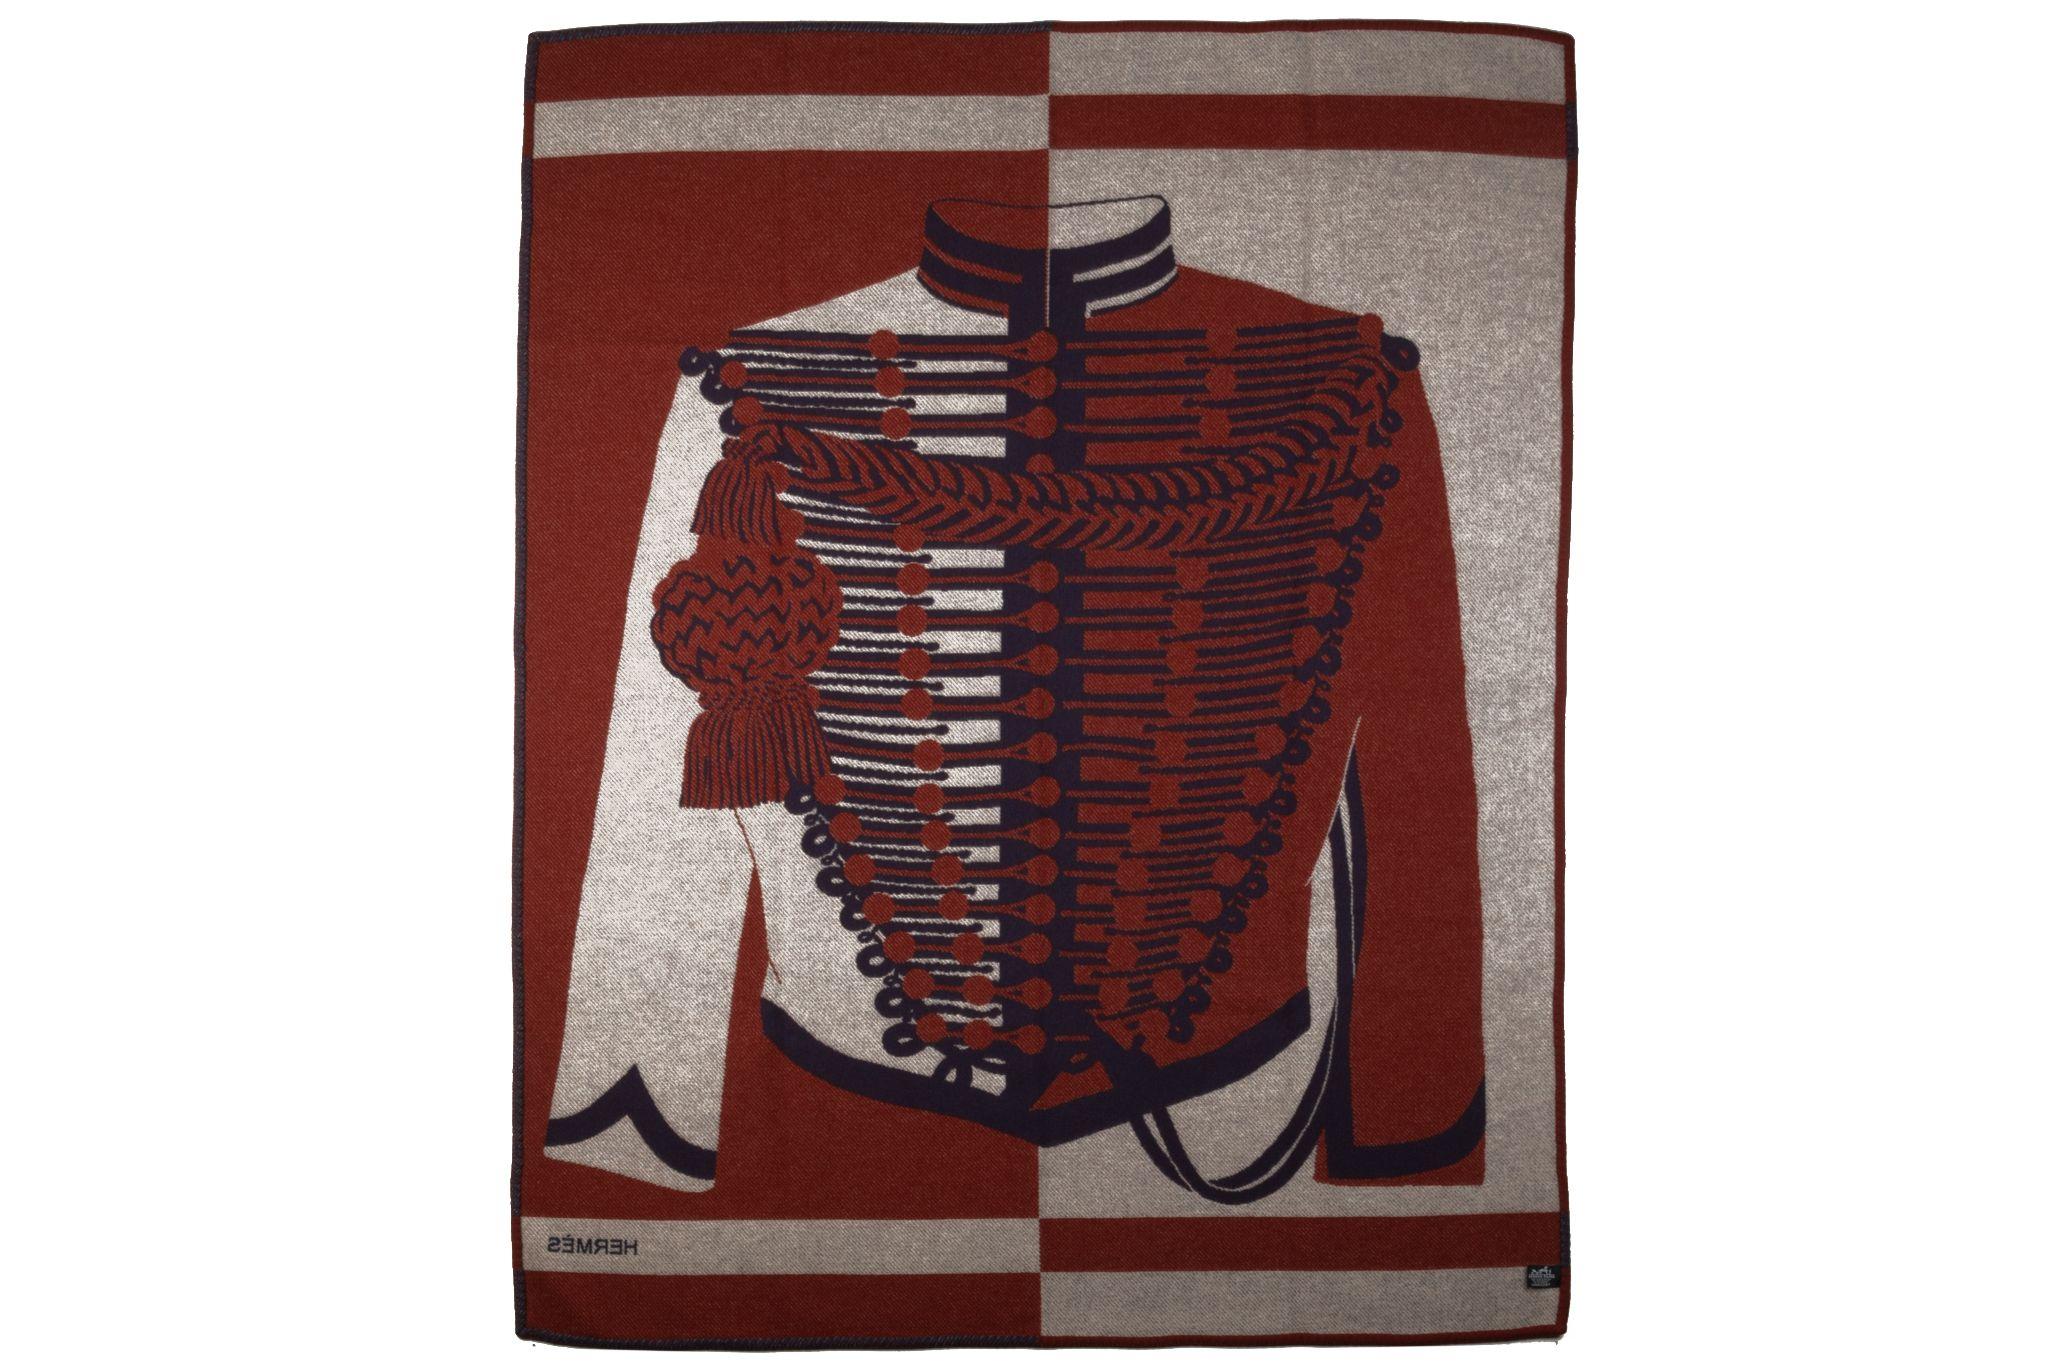 Hermes brand new collectible Brandebourg red and blue blanket. 90% wool and 10% cashmere.